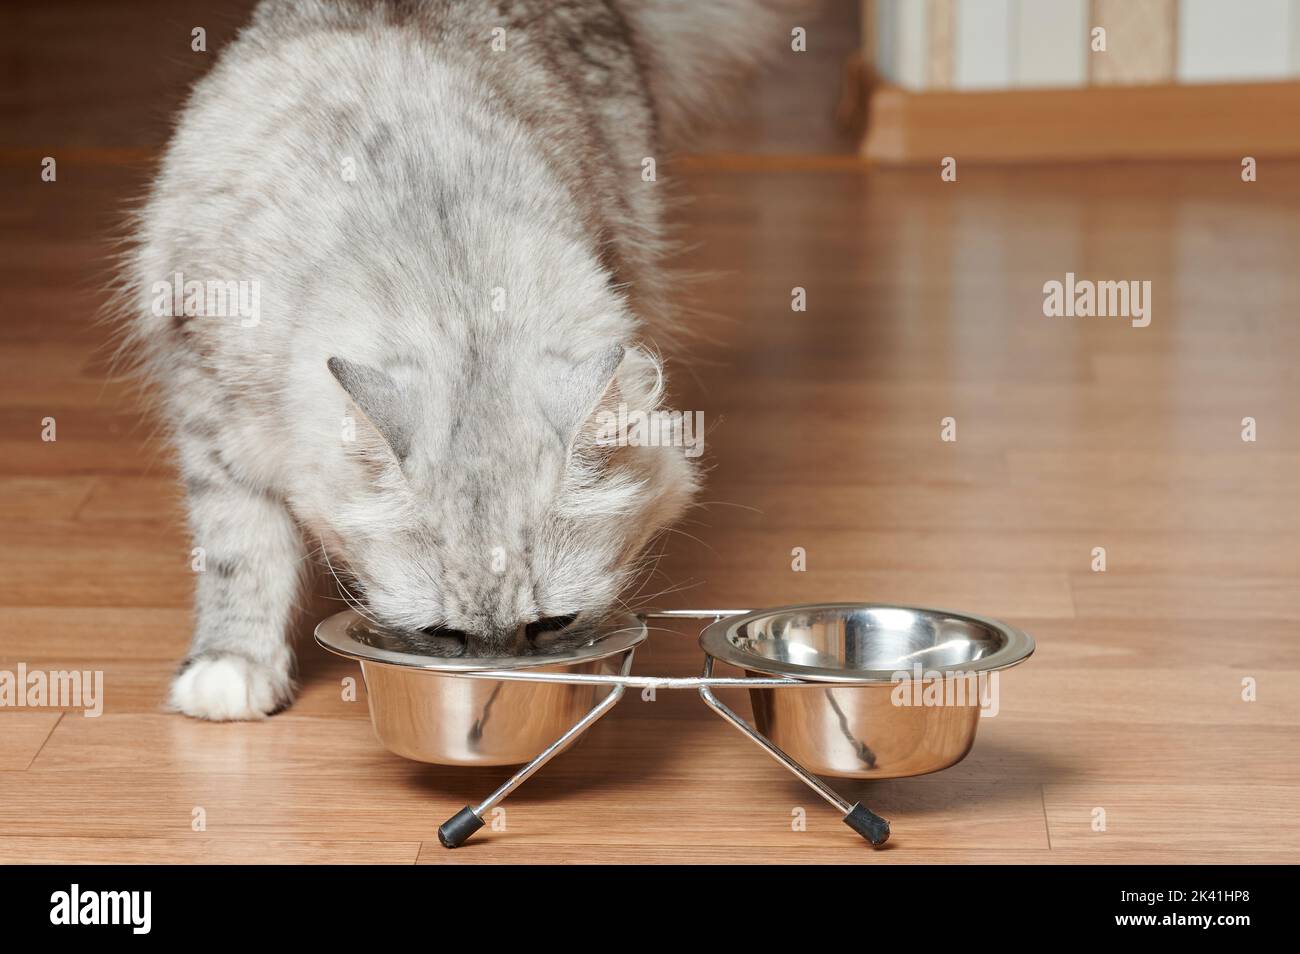 Pretty cat eat food from metal plate close up view Stock Photo